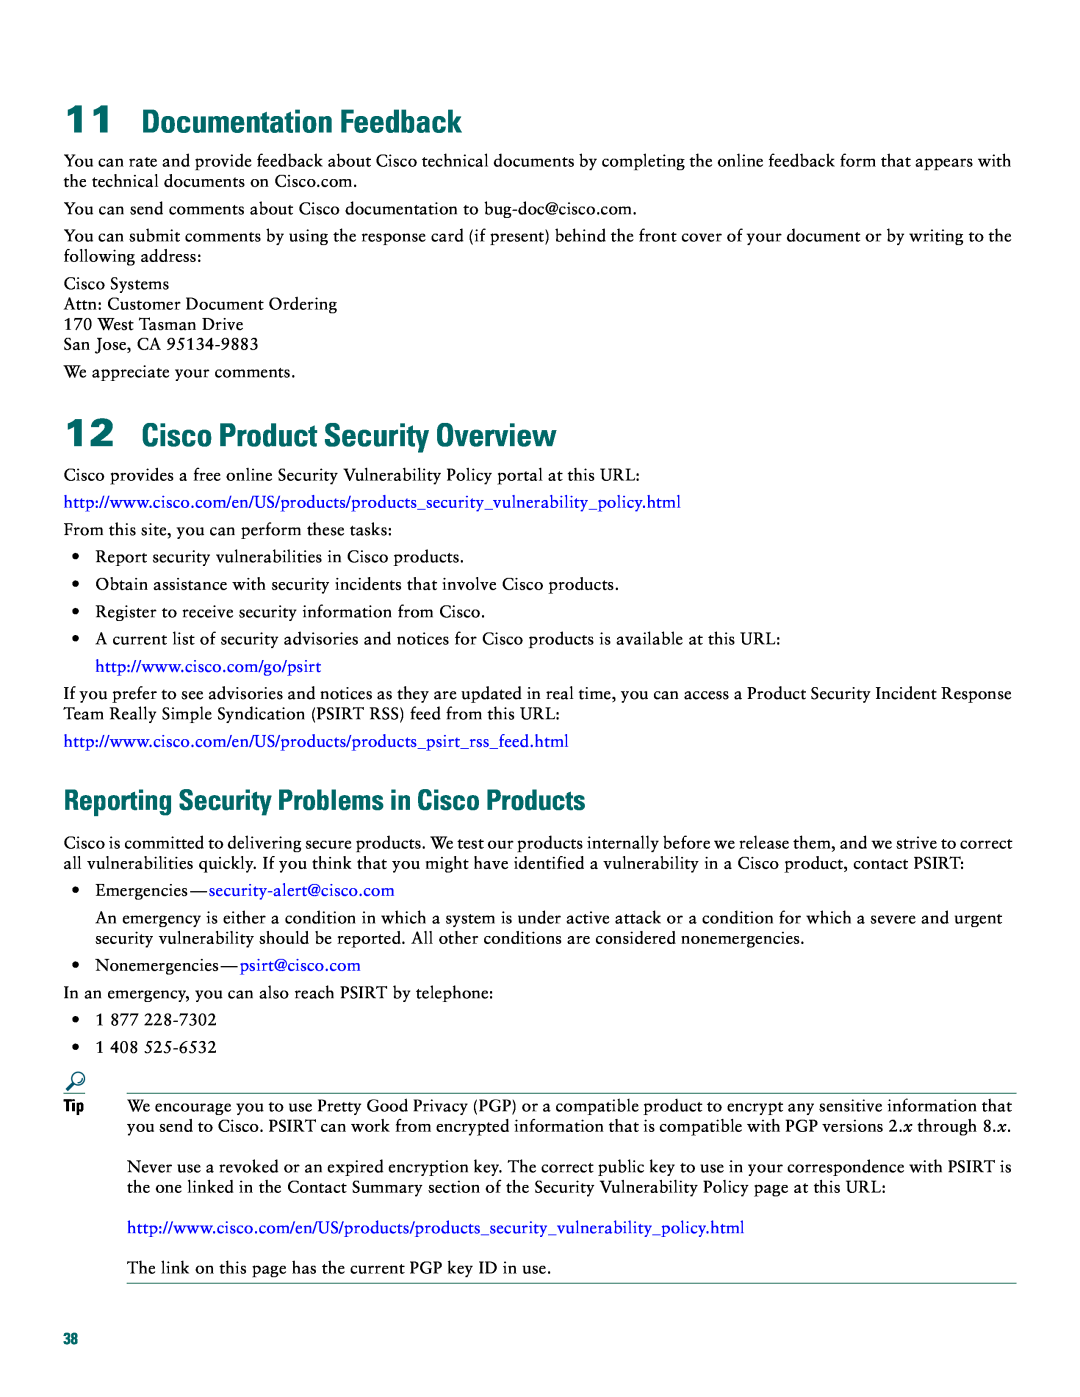 Cisco Systems 2800 Documentation Feedback, Cisco Product Security Overview, Reporting Security Problems in Cisco Products 